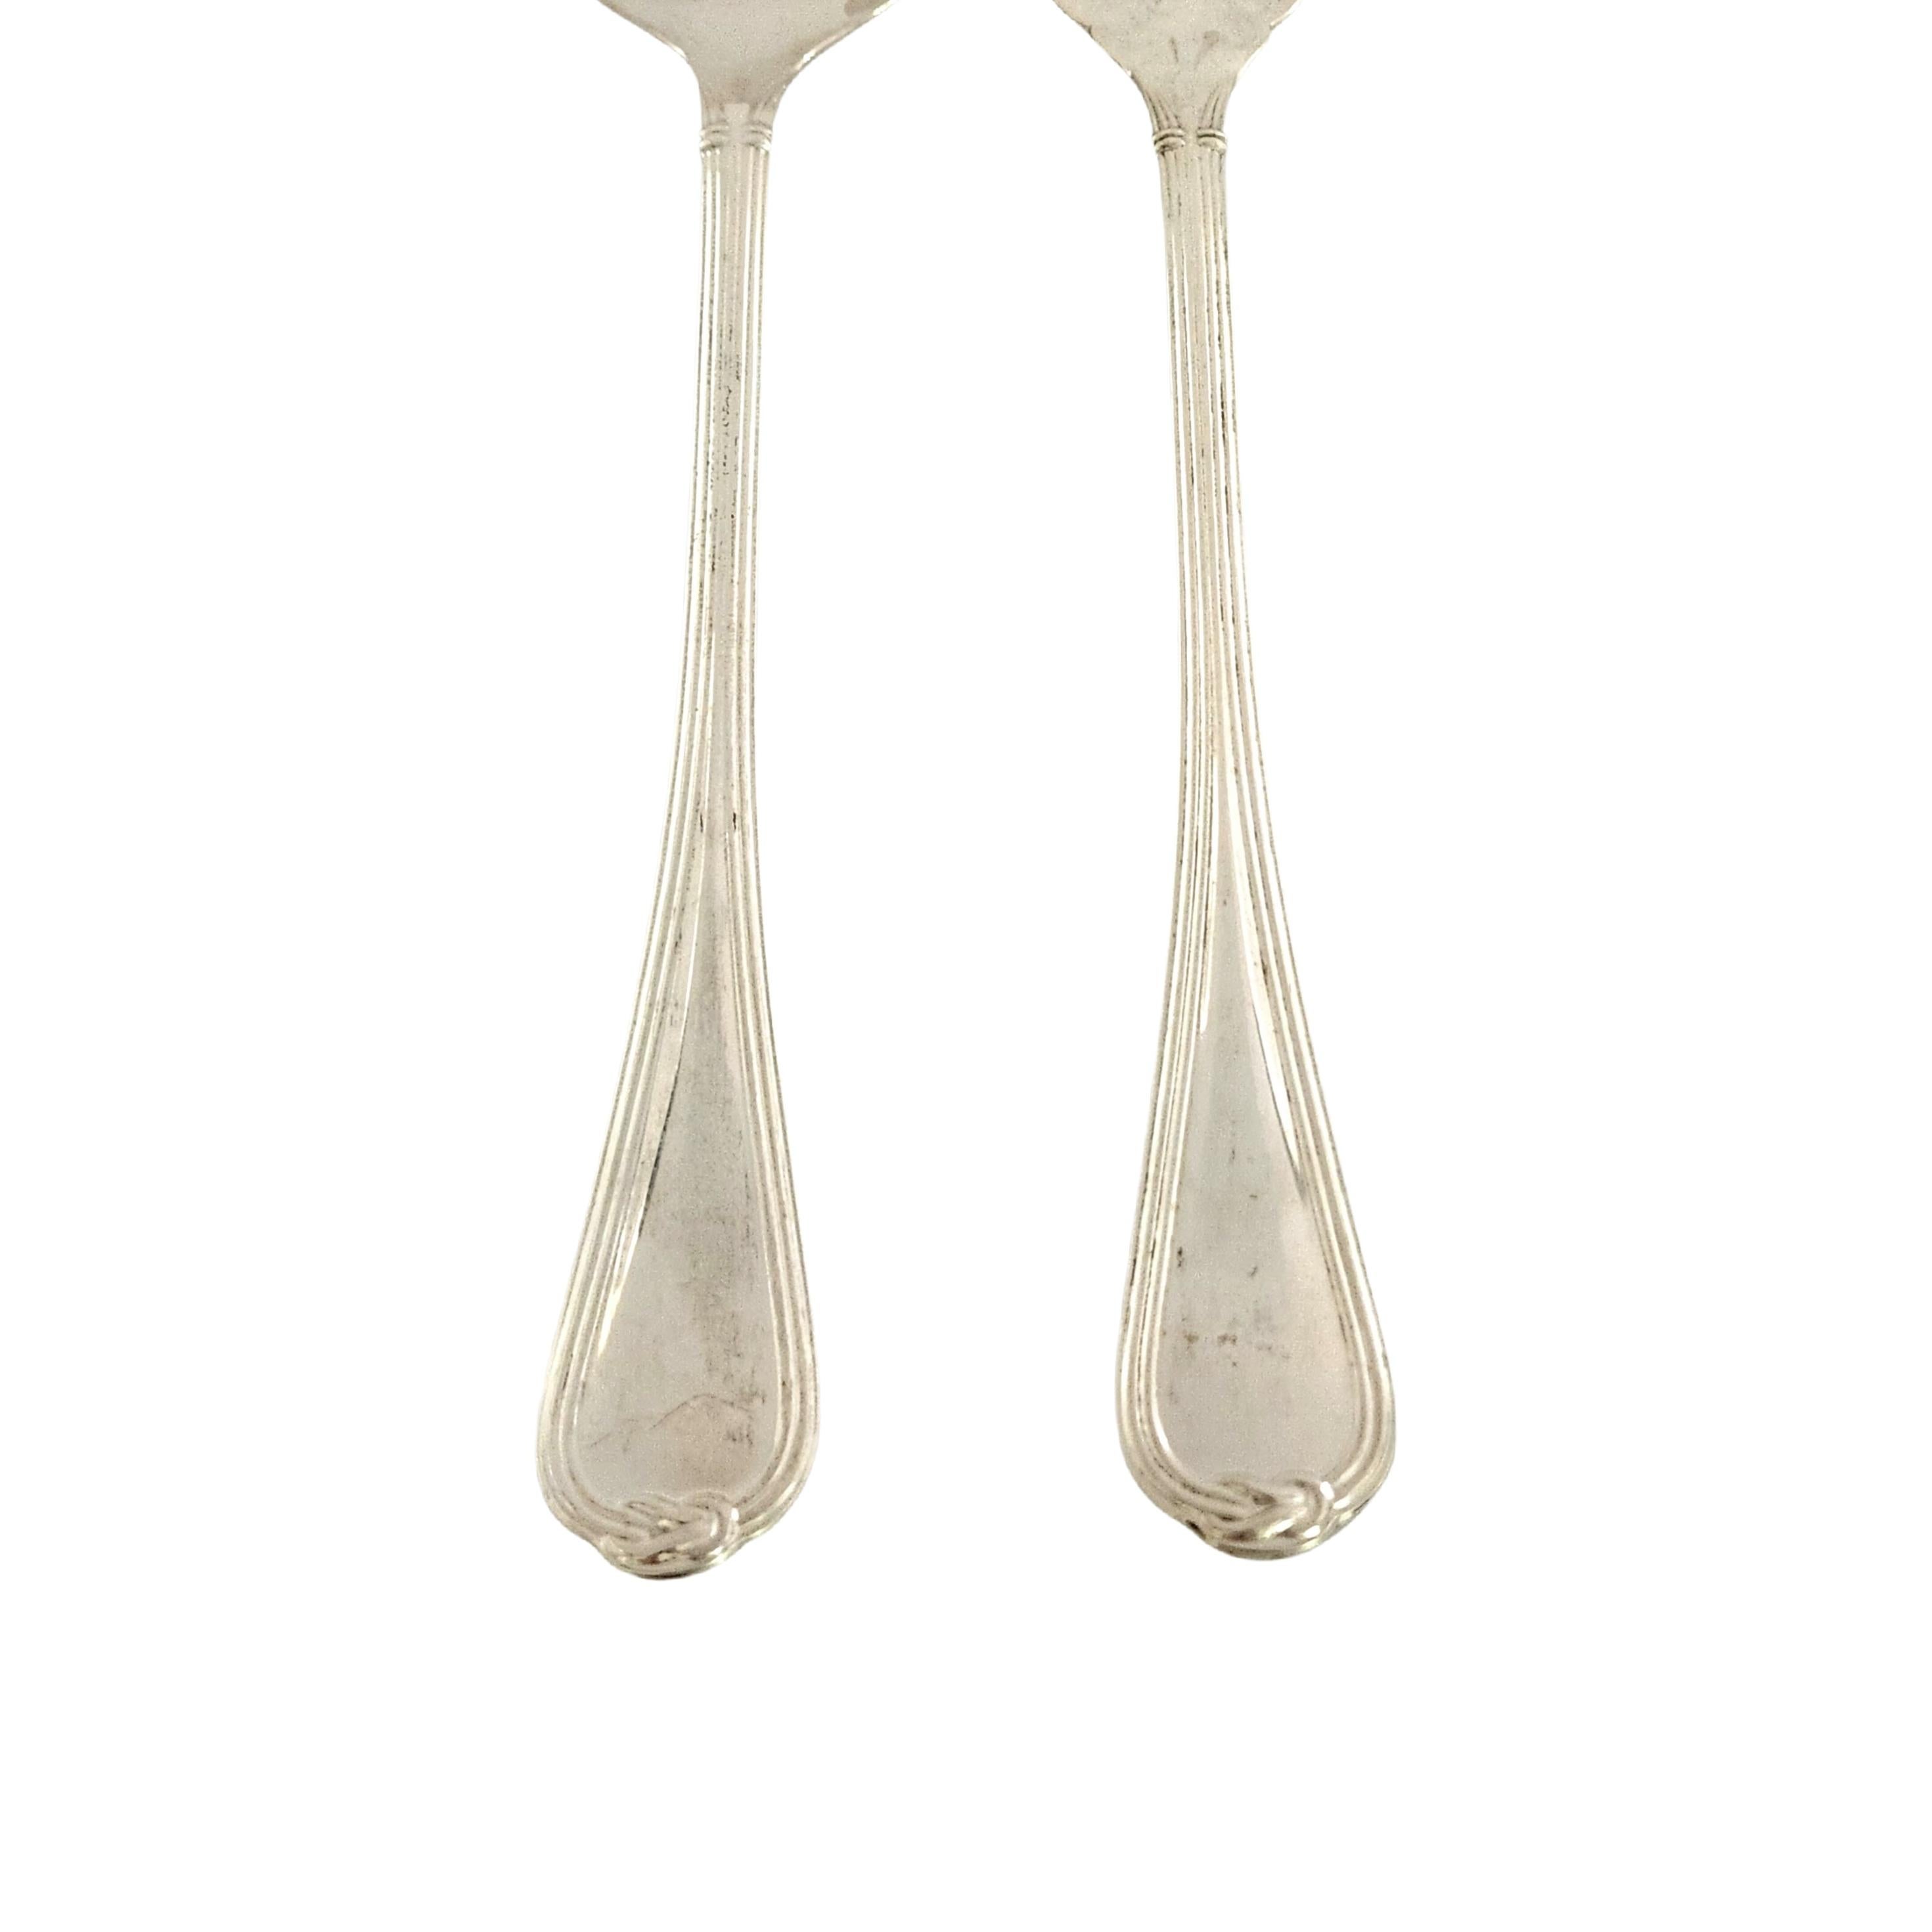 Sterling silver salad serving fork and spoon set in the Oceana pattern by Christofle.

A beautiful large serving set in a simple and elegant pattern, including a spoon and fork.

Spoon measures approx 10